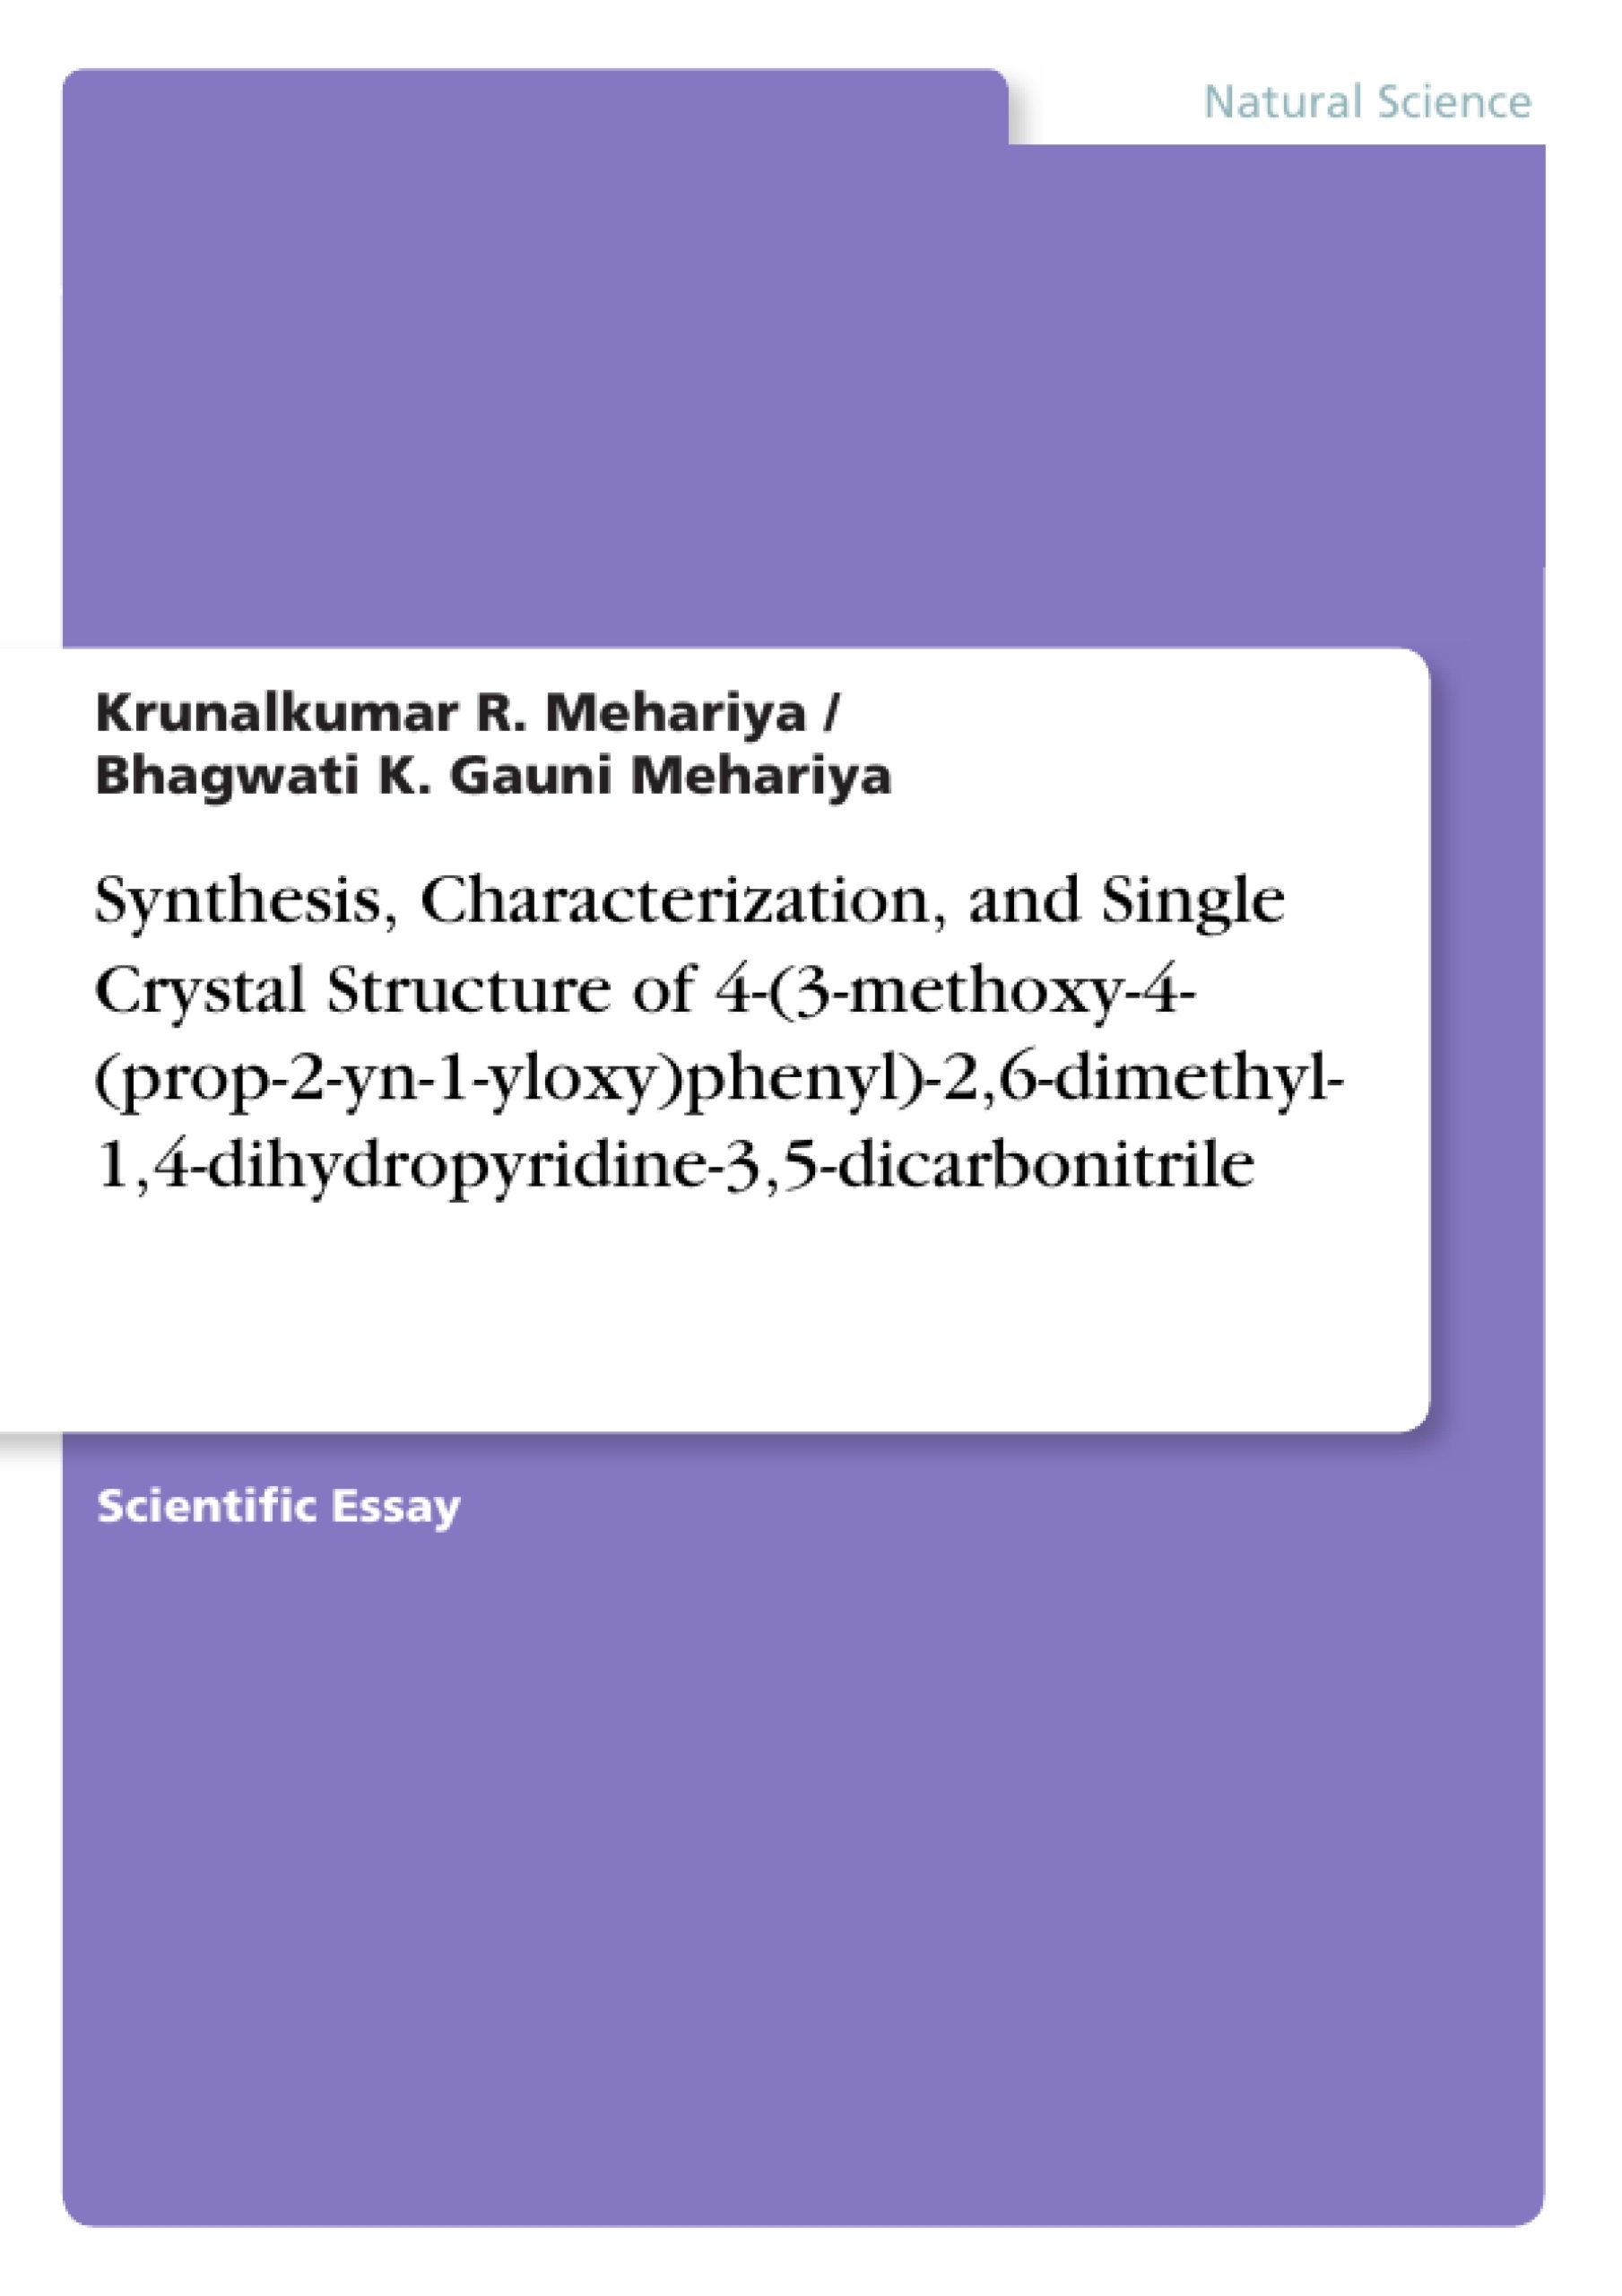 Title: Synthesis, Characterization, and Single Crystal Structure of 4-(3-methoxy-4-(prop-2-yn-1-yloxy)phenyl)-2,6-dimethyl-1,4-dihydropyridine-3,5-dicarbonitrile